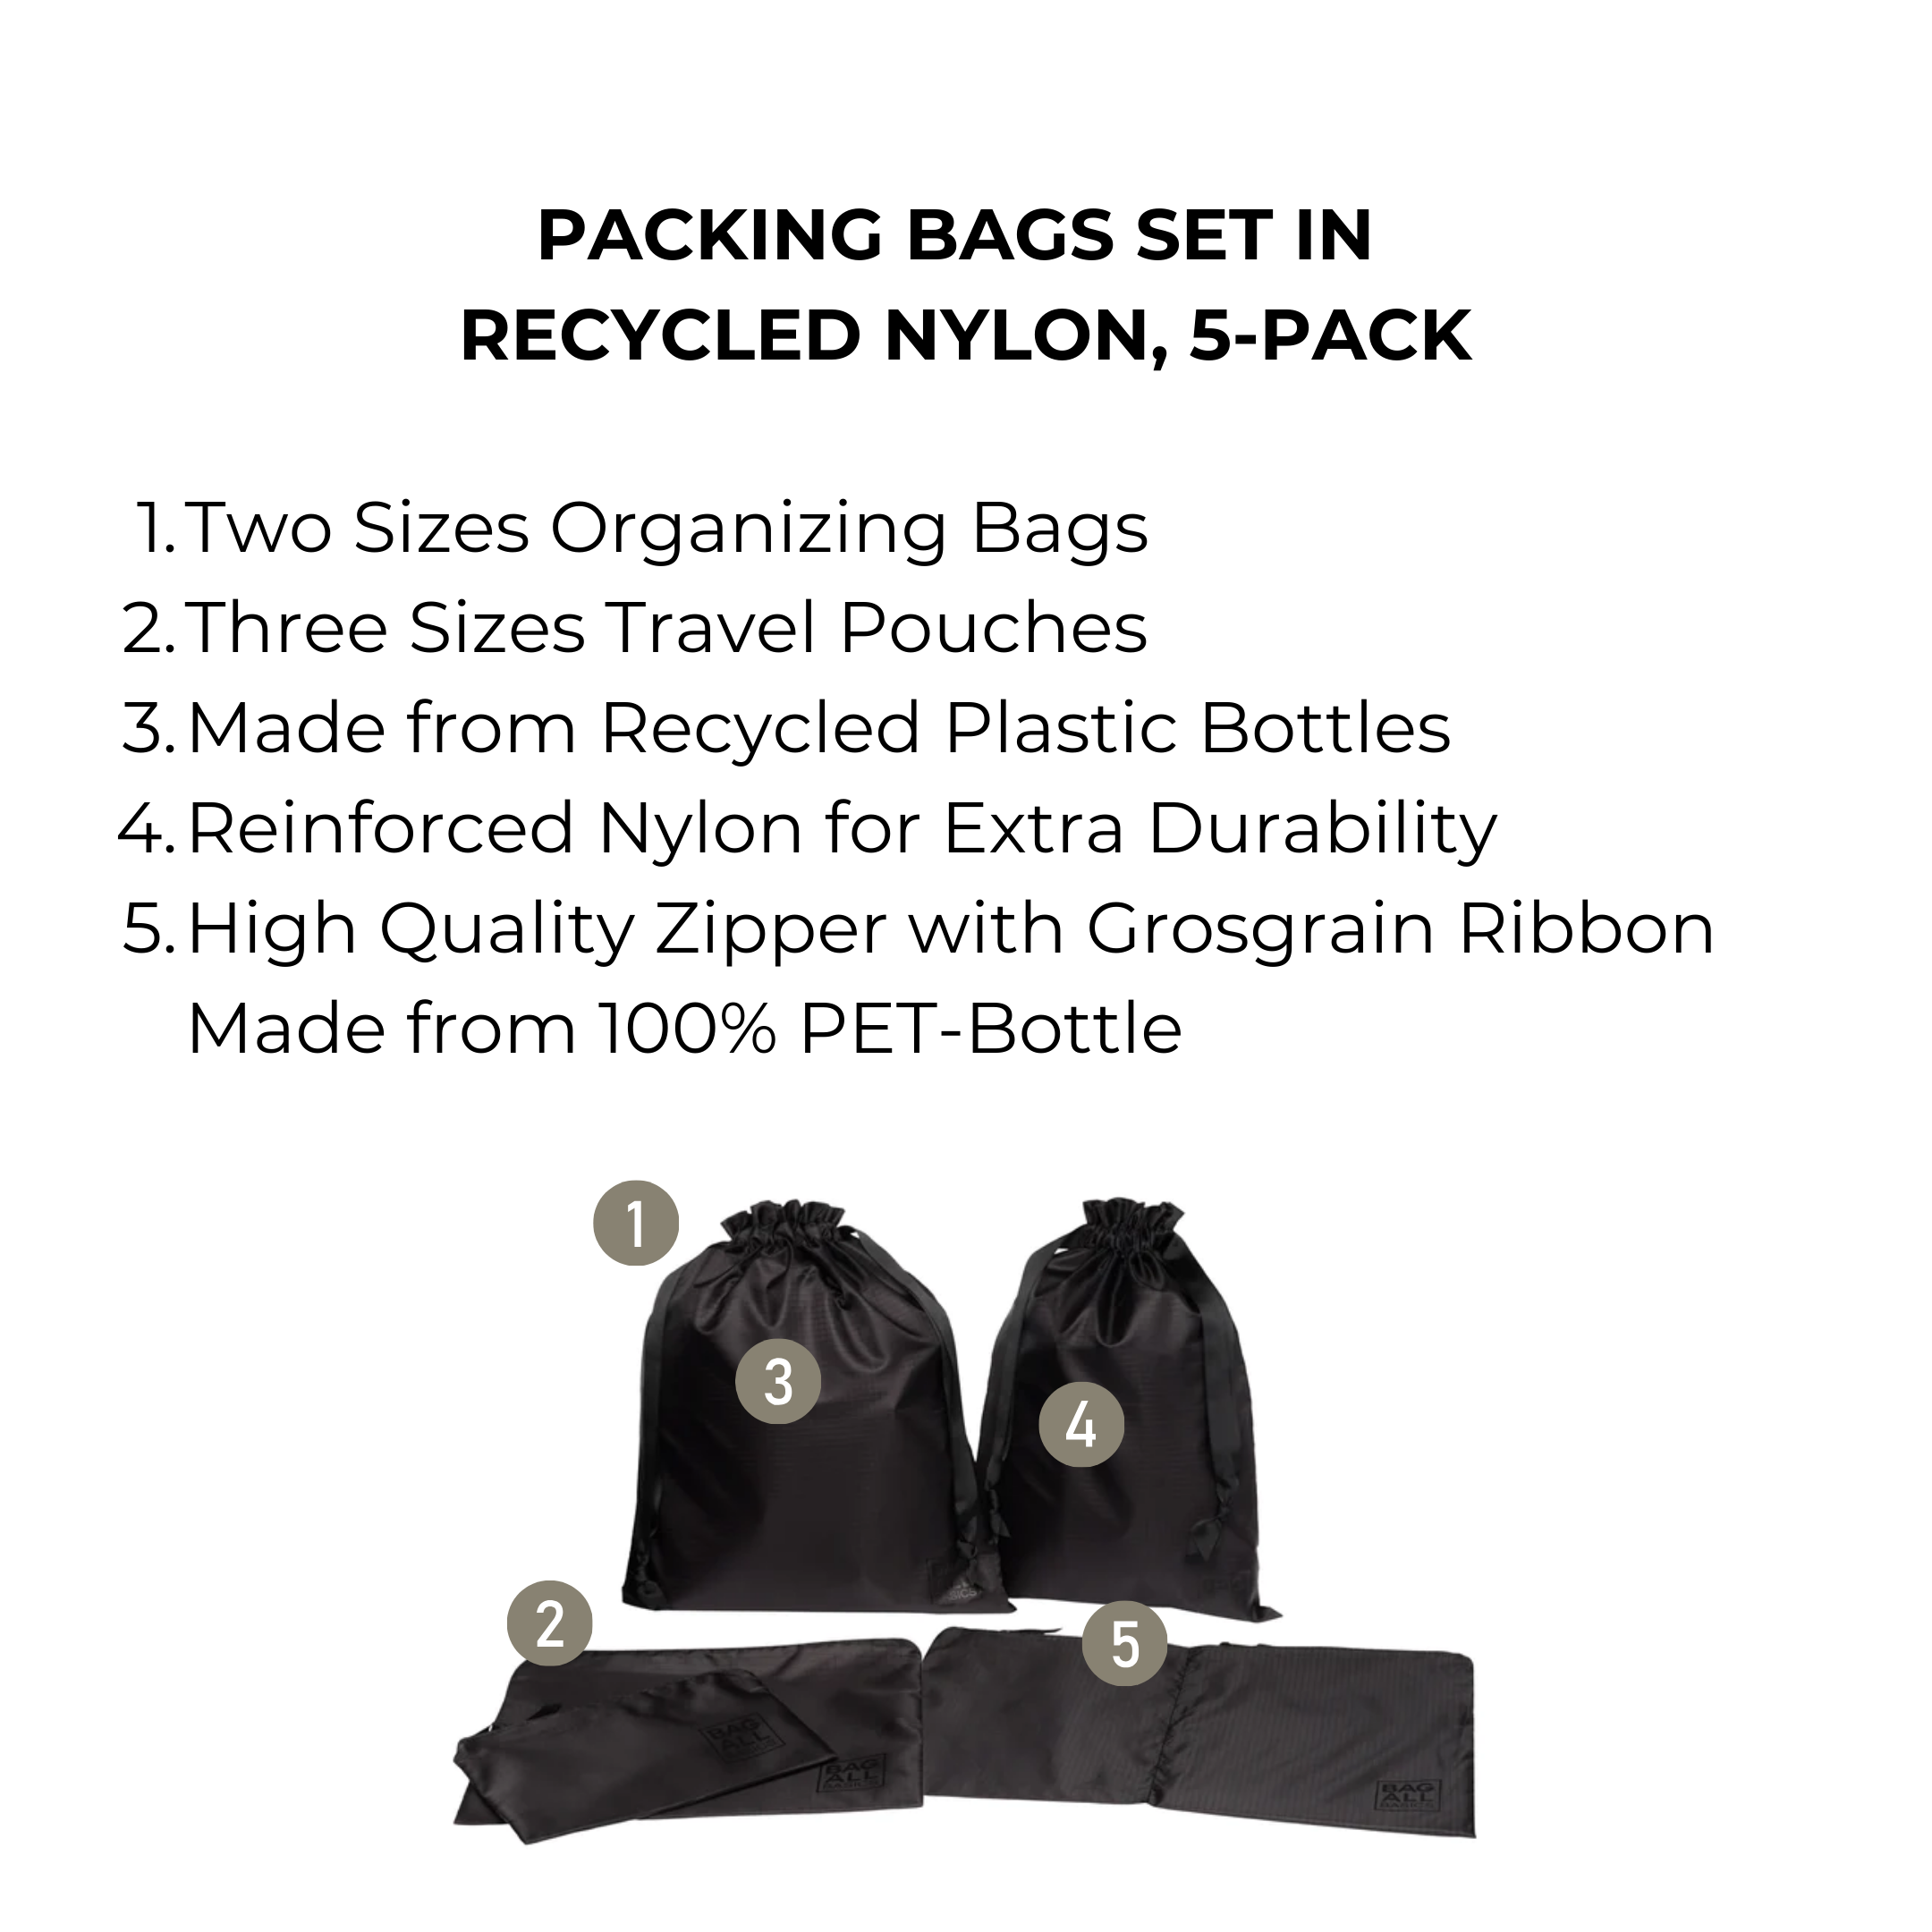 Packing Bags Set in Recycled Nylon, 5-pack, Black | Bag-all